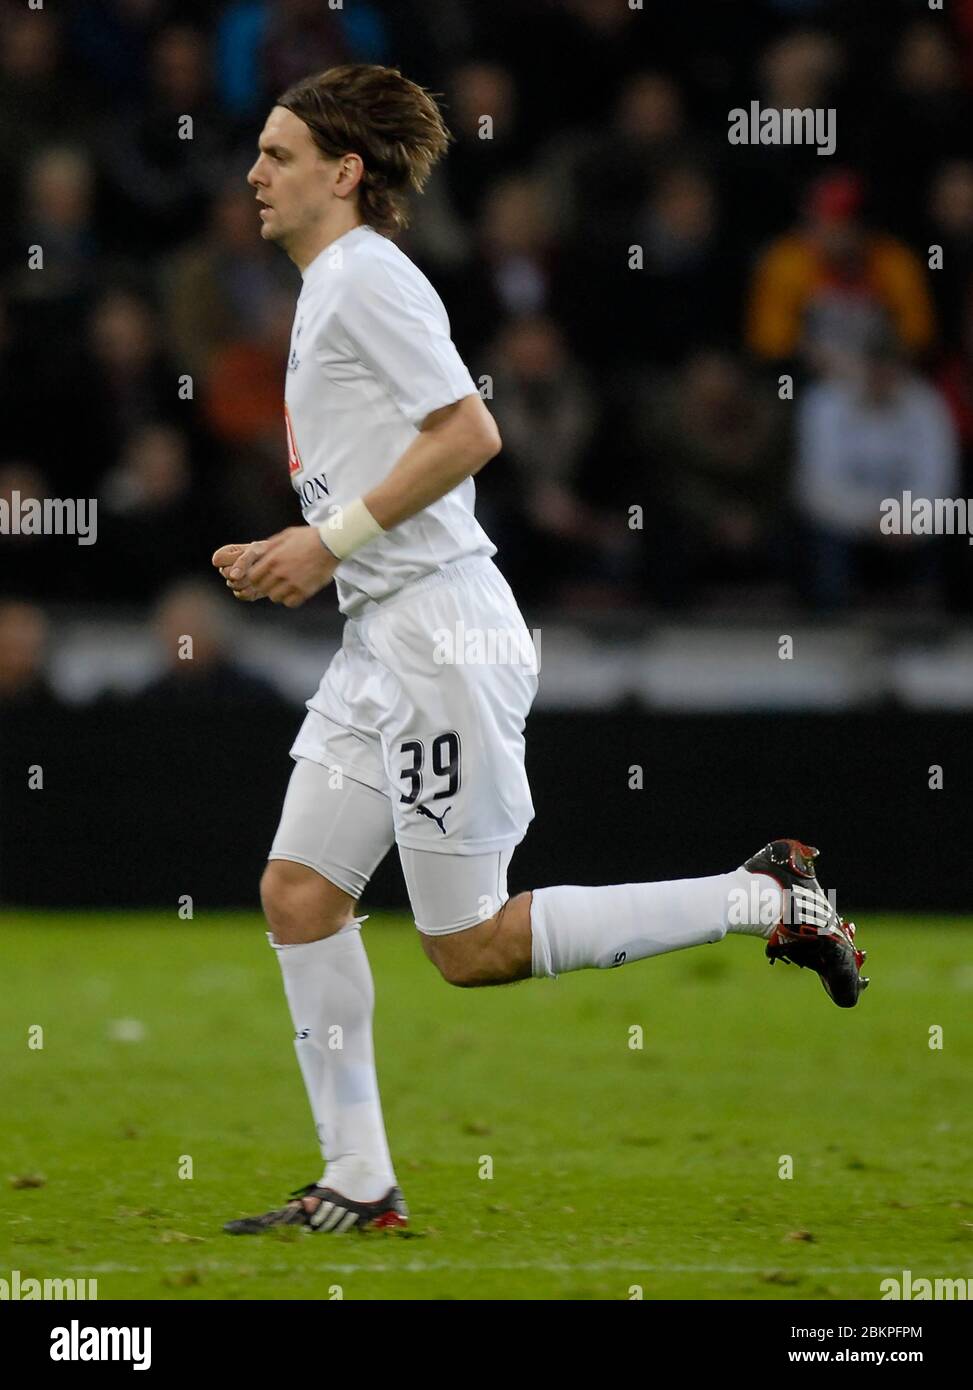 EINDHOVEN, NEDERLAND. MARCH 12: Jonathan Woodgate of Tottenham Hotspur During UEFA Cup Round of 16 Second Leg between PSV Eindhoven and Tottenham Hots Stock Photo